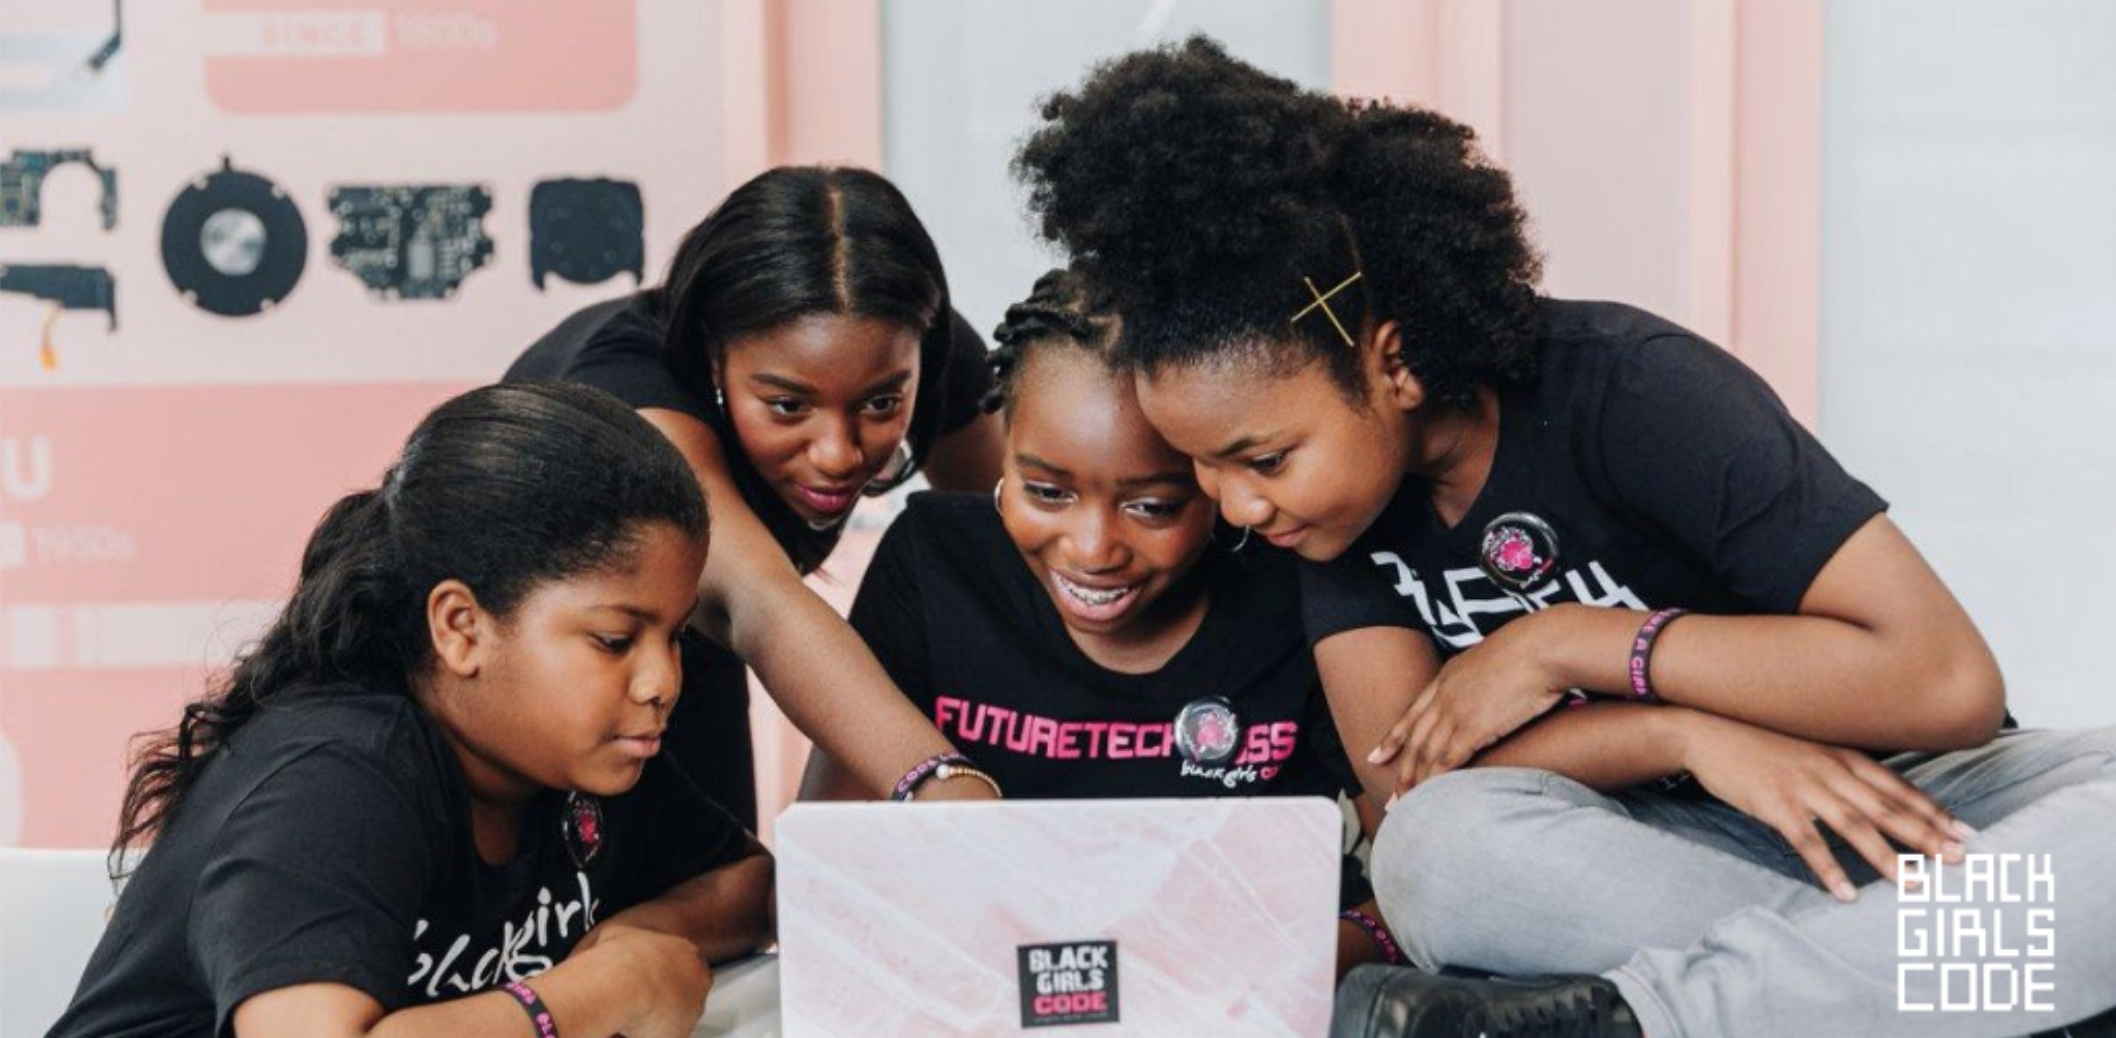 NIKE Announces Official Partnership and $1M Grant For Black Girls CODE